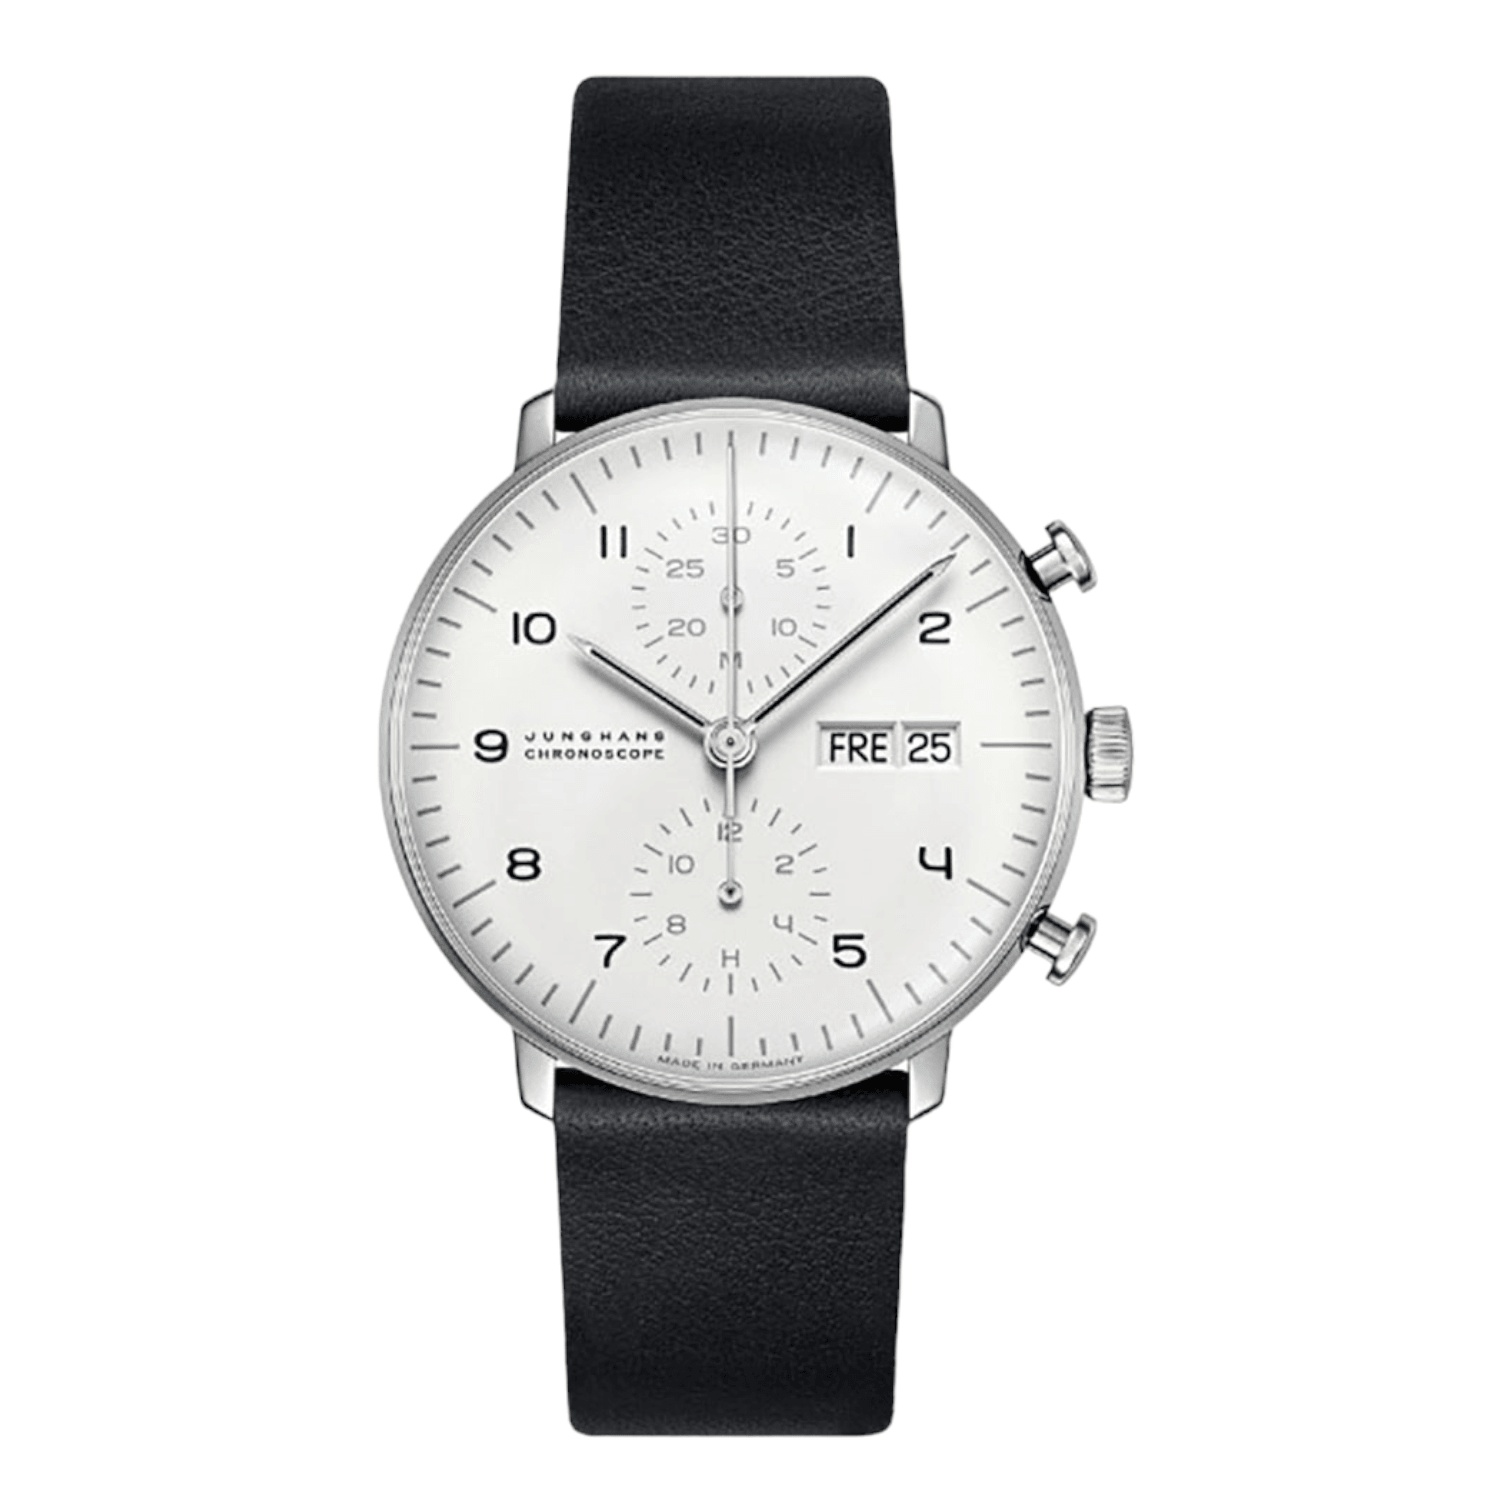 Junghans Max Bill Chronoscope Ed. 2019 (with Table Clock) Ref. 363/2919.01 - ON5461 - LuxuryInStock